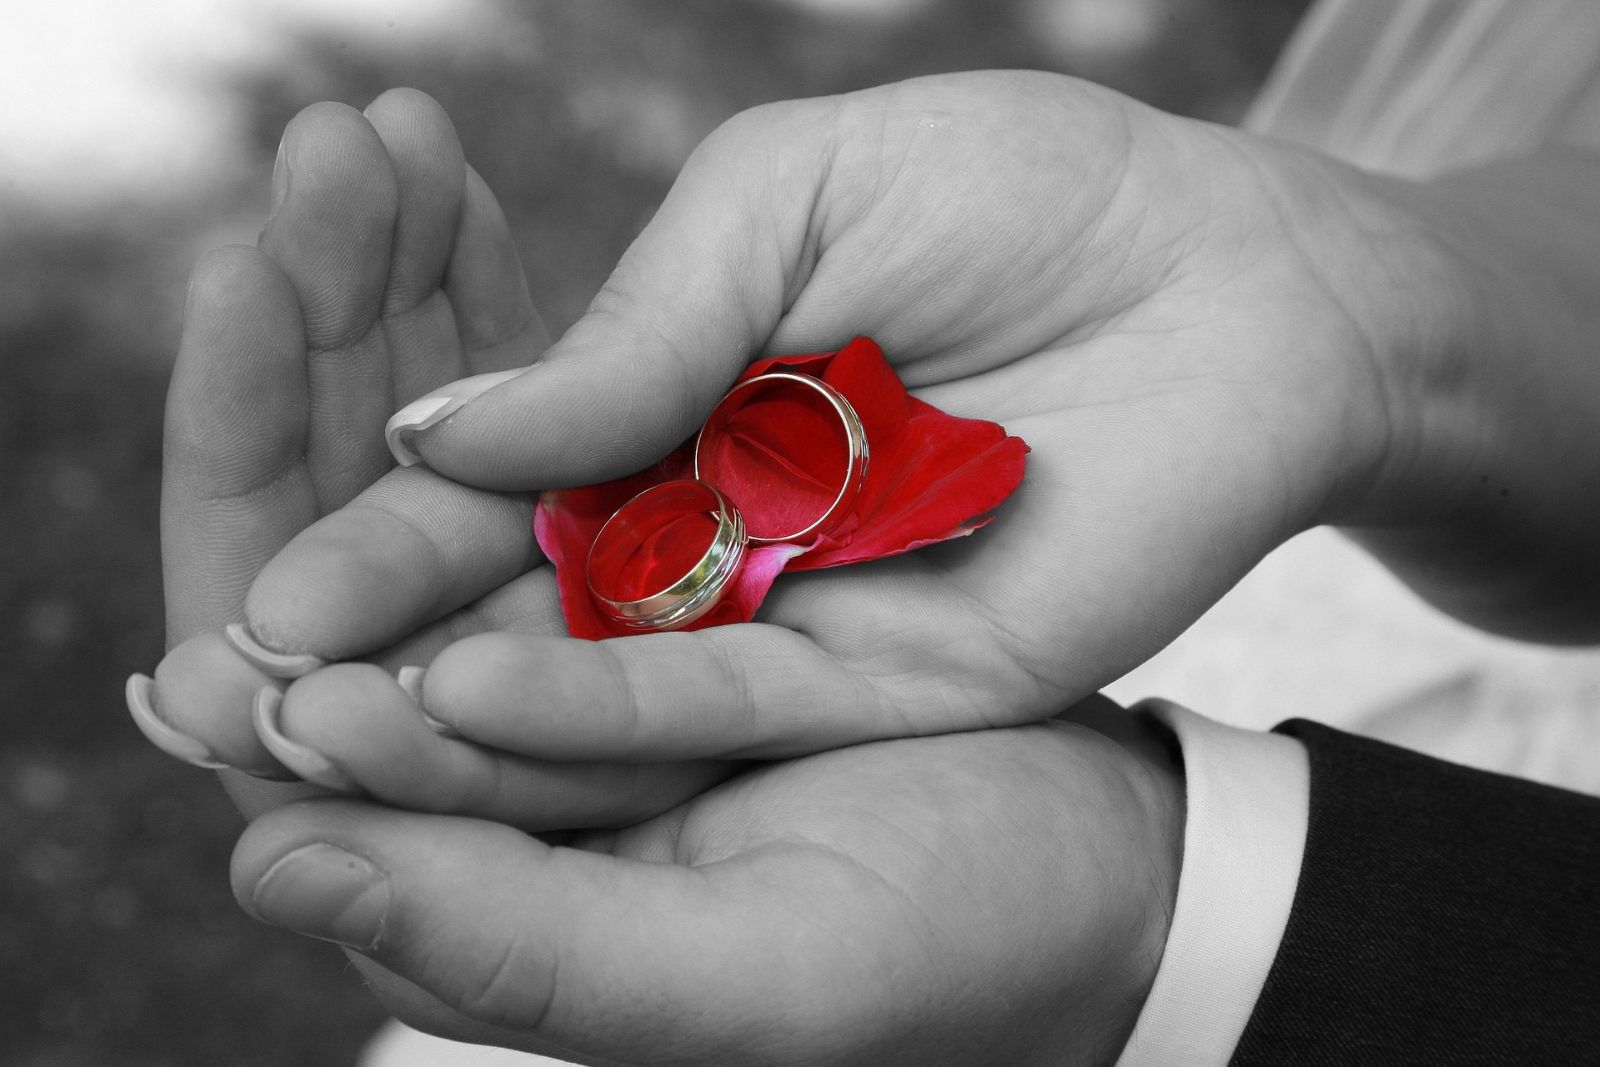 Hands holding two wedding rings resting on a red rose petal for a Ring Warming Ceremony